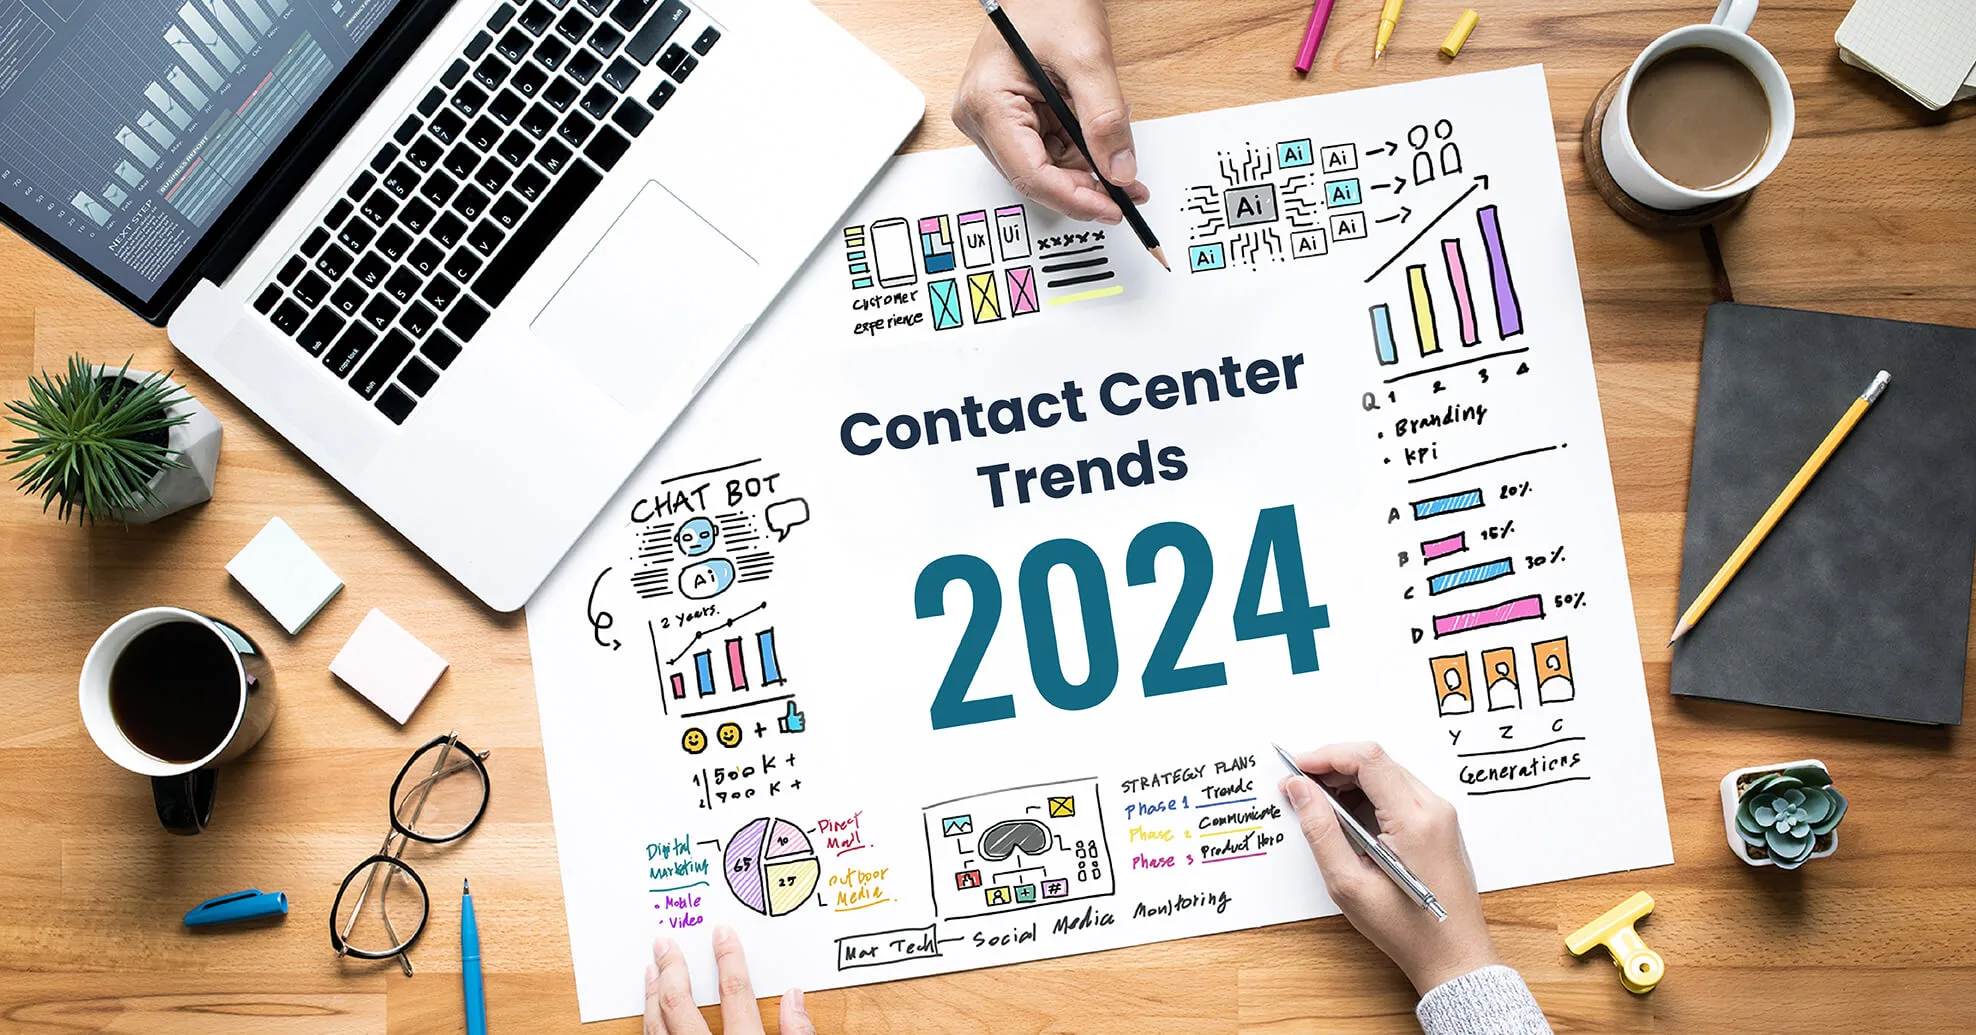 8 Hottest Contact Center Trends